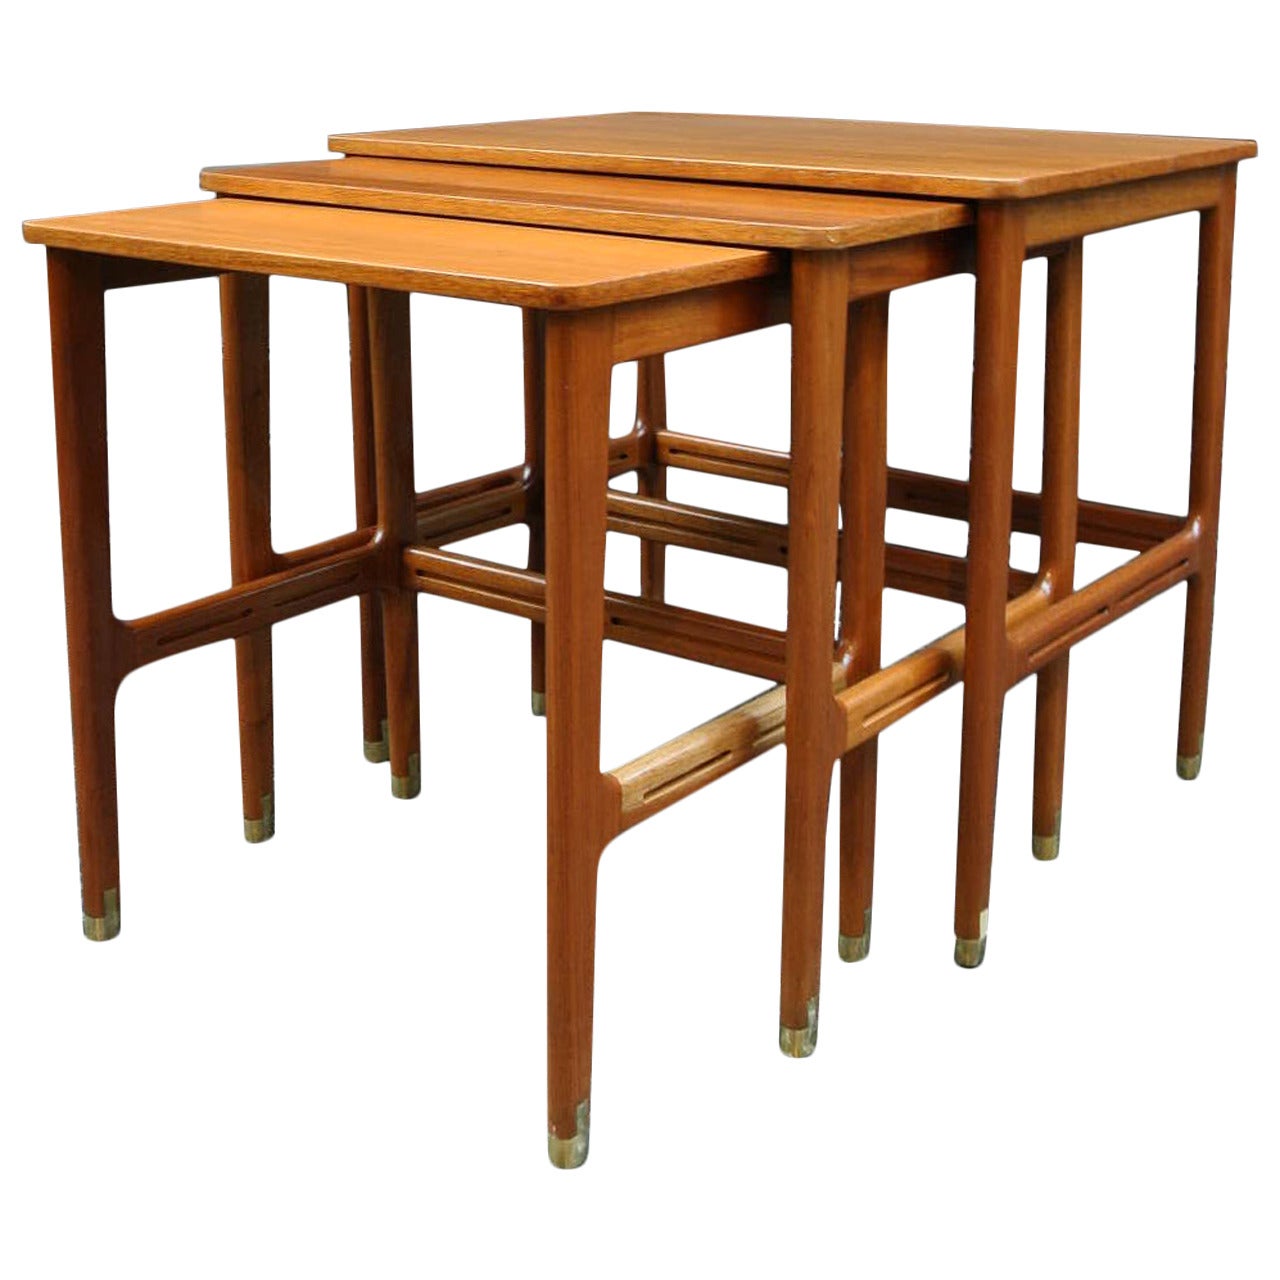 Mexican Set of Three Nesting Tables